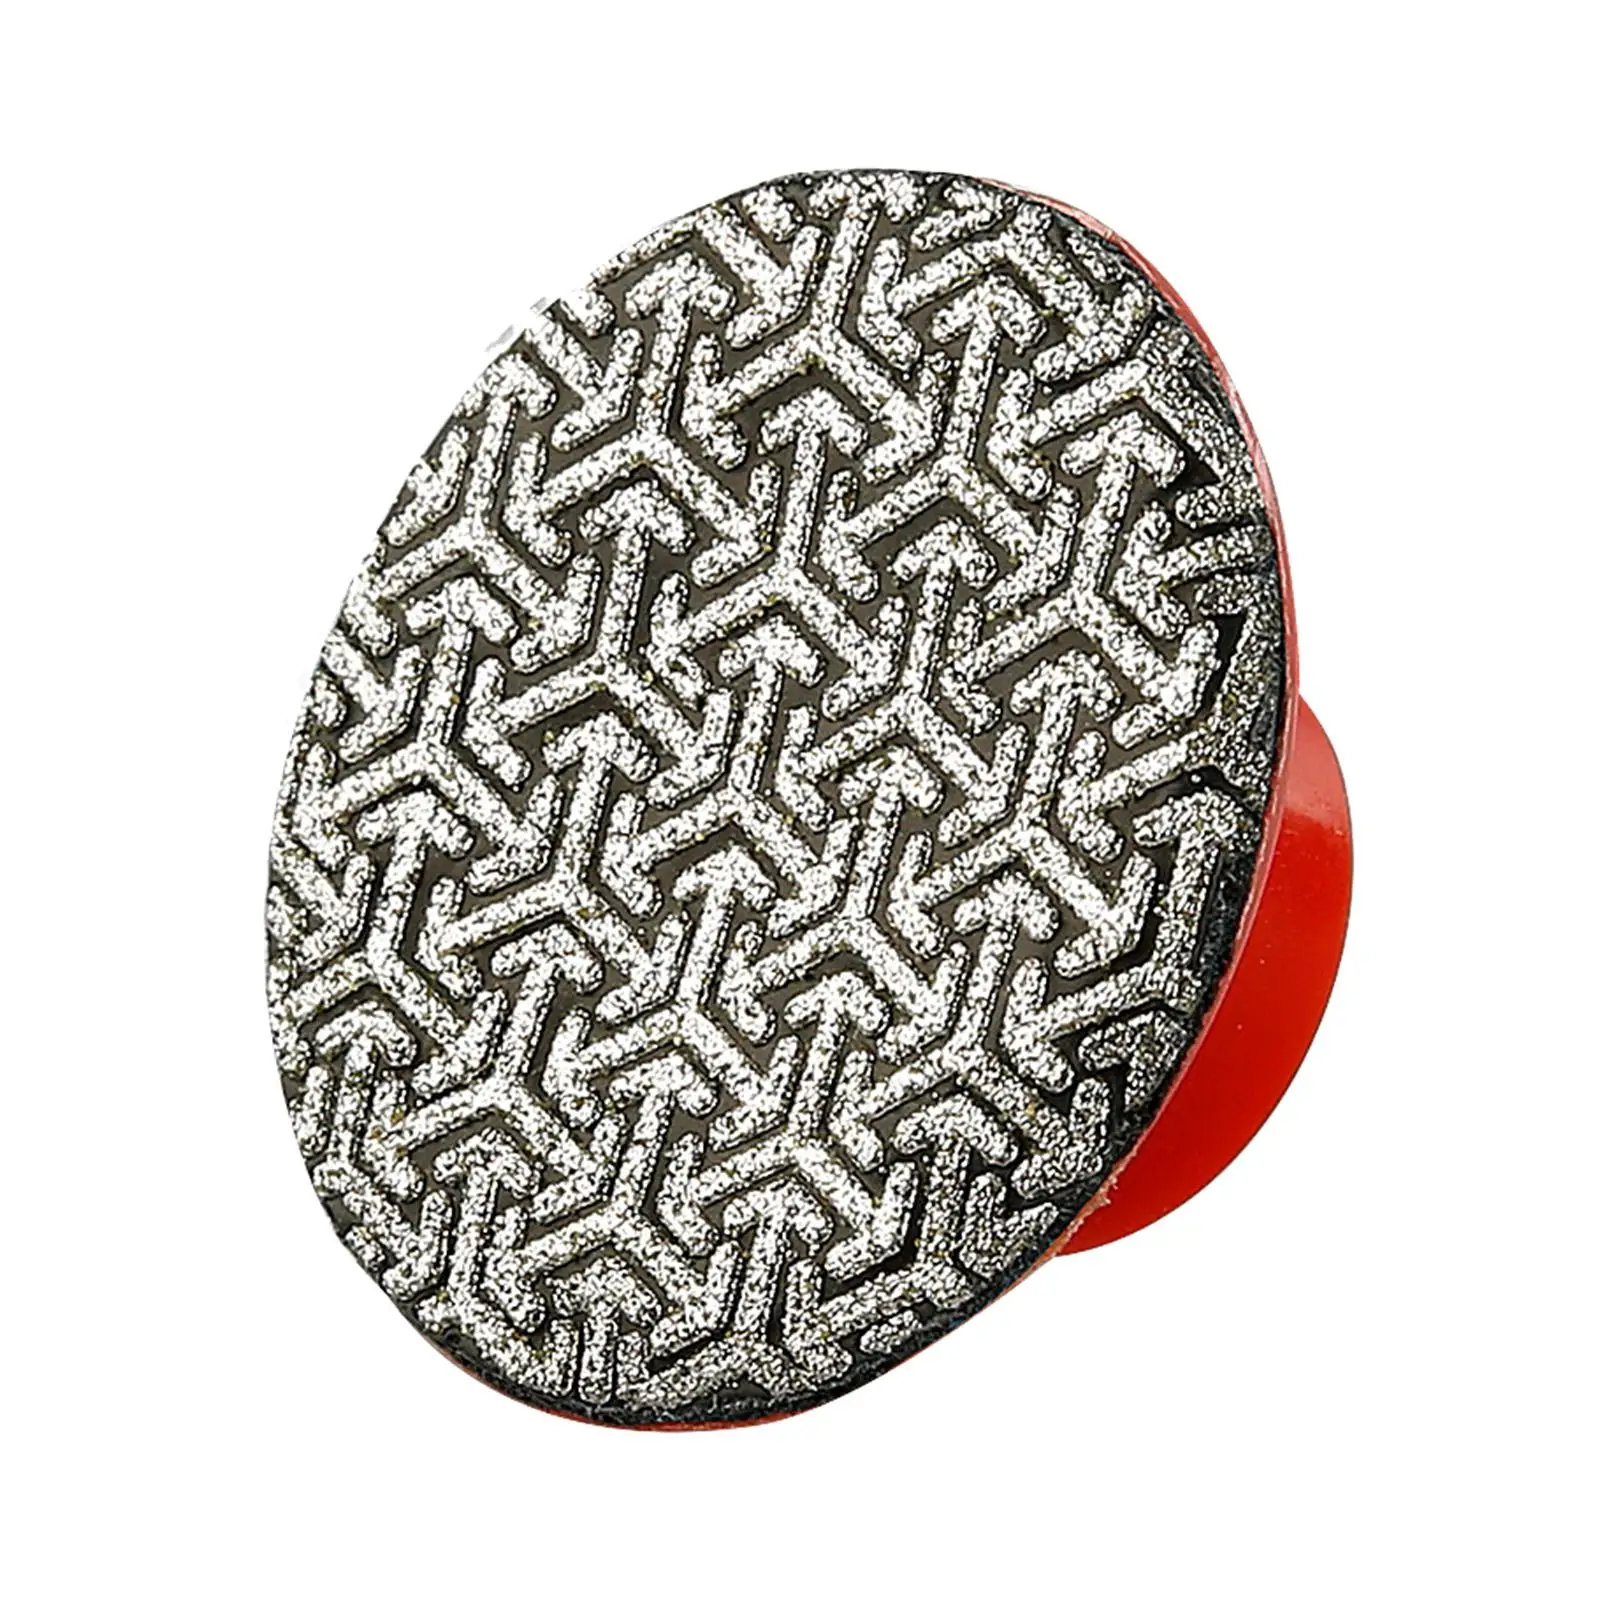 2inch Angle Grinder Diamond Grinding Disc Accessory Nylon Shell 10mm Thread for Granite Marble Ceramic Tile Convenient Assemble